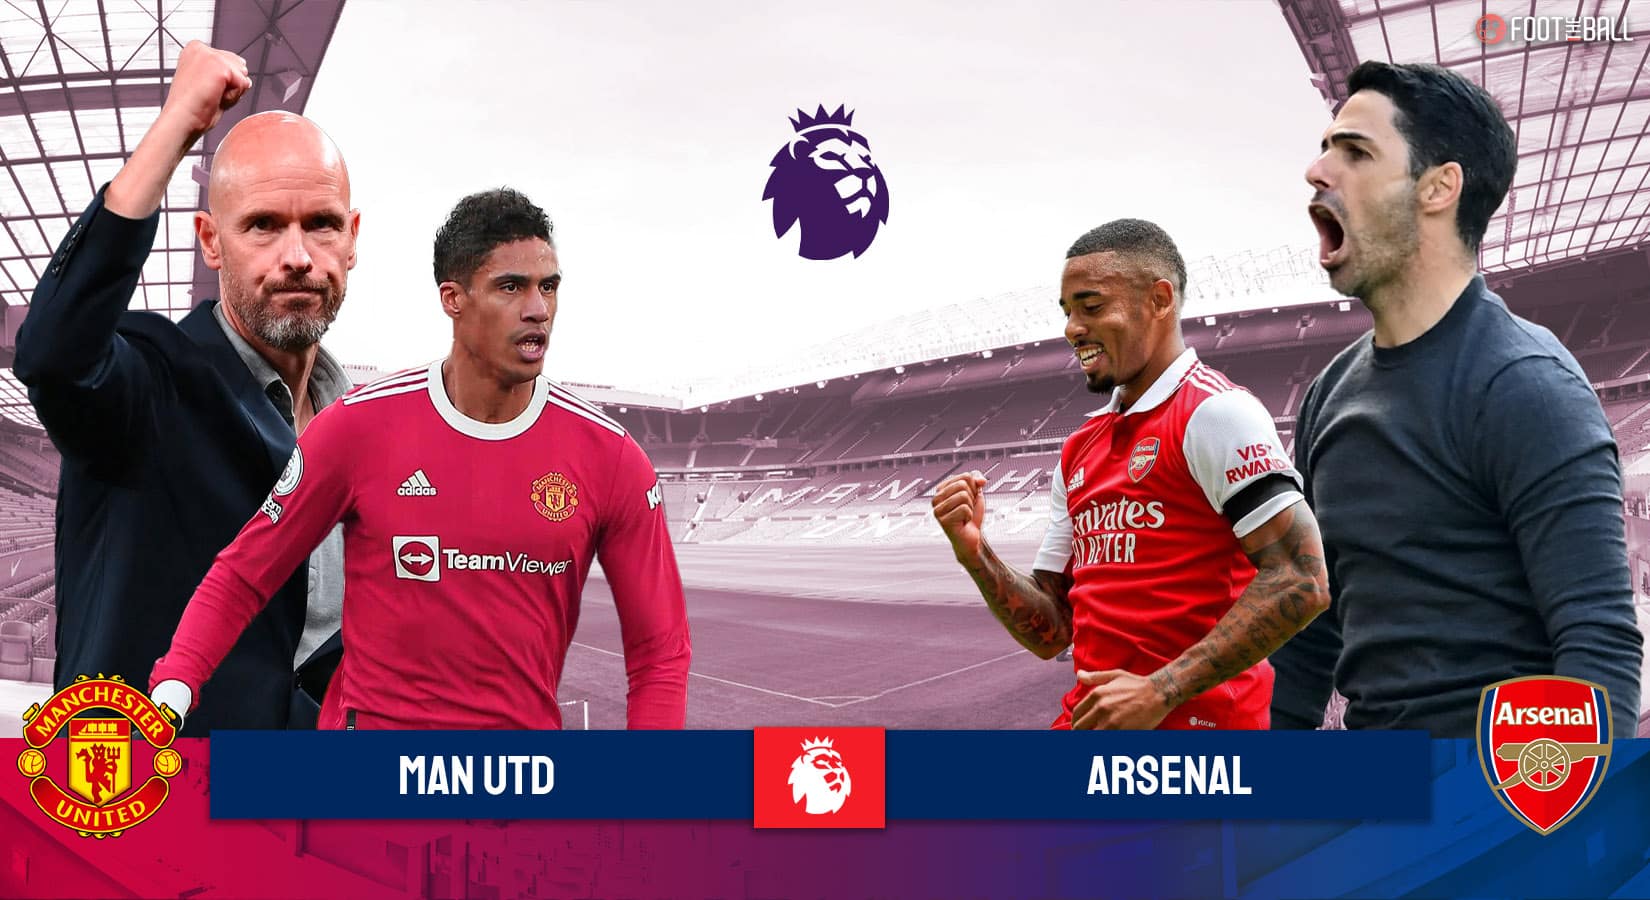 Arsenal vs Manchester United: Prediction and Preview